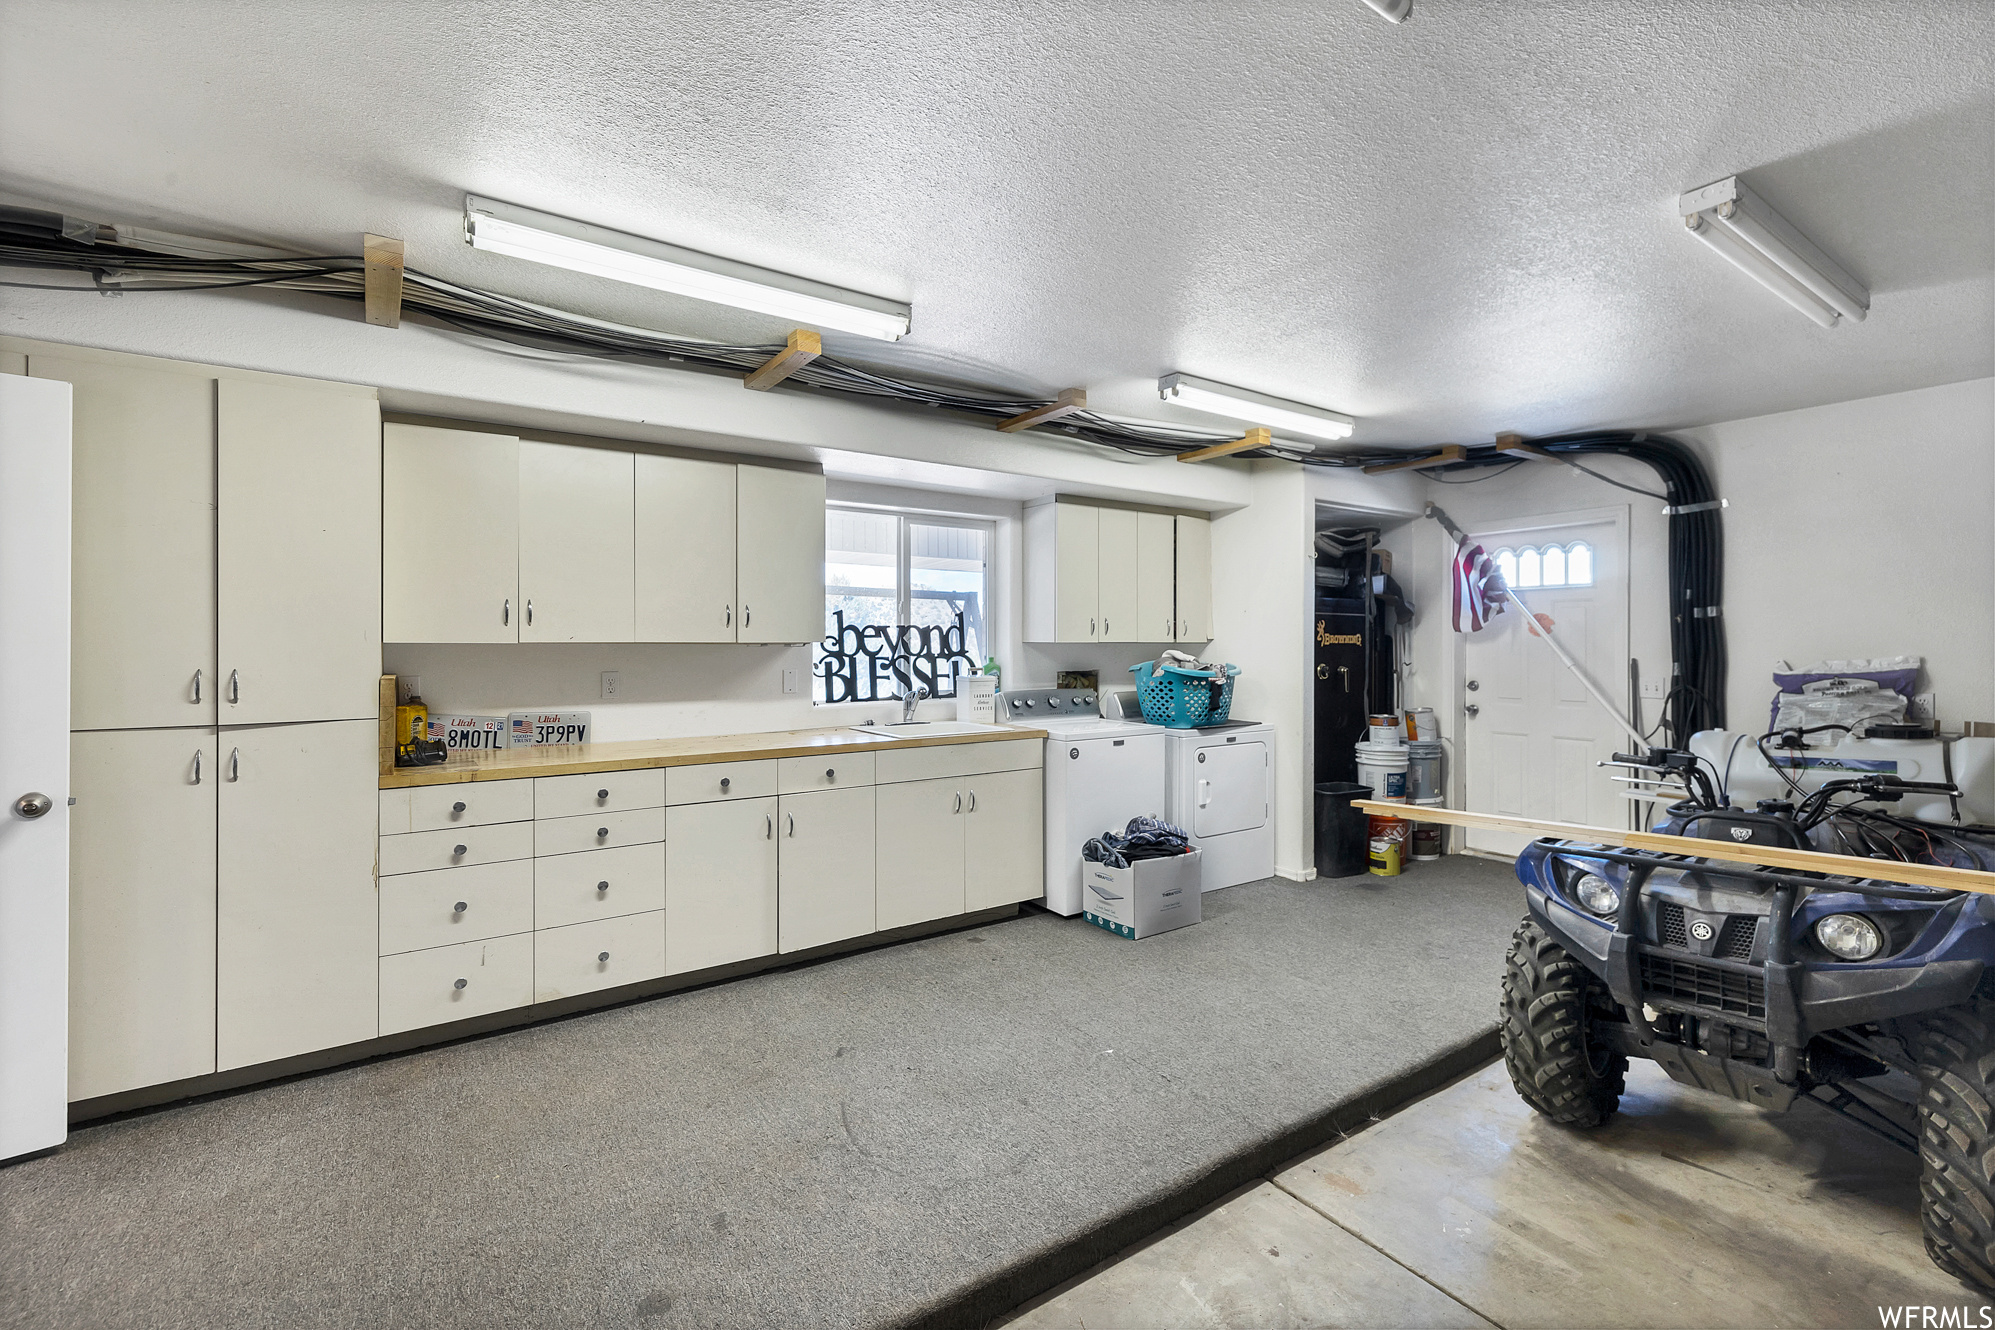 Garage featuring washer / dryer, light floors, and white cabinets